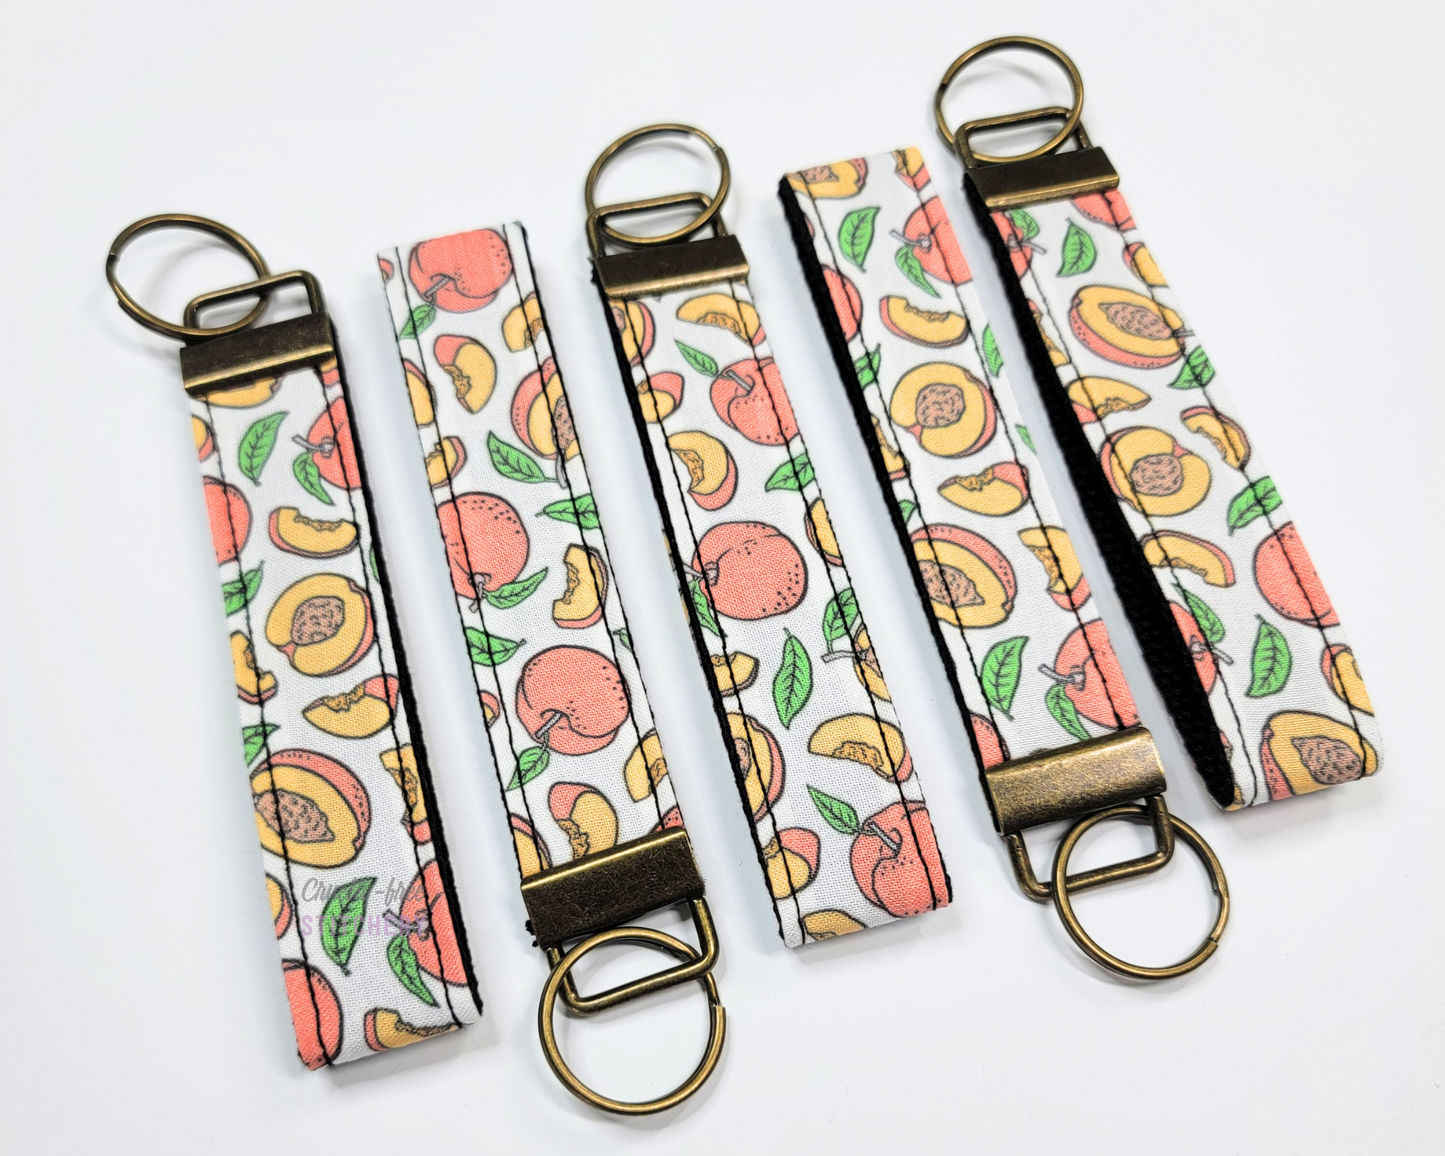 Wristlet key fobs arranged in a row of five with ends alternating. The wristlet is peaches printed on a white background, and the hardware and keyring are an antiqued brass color.